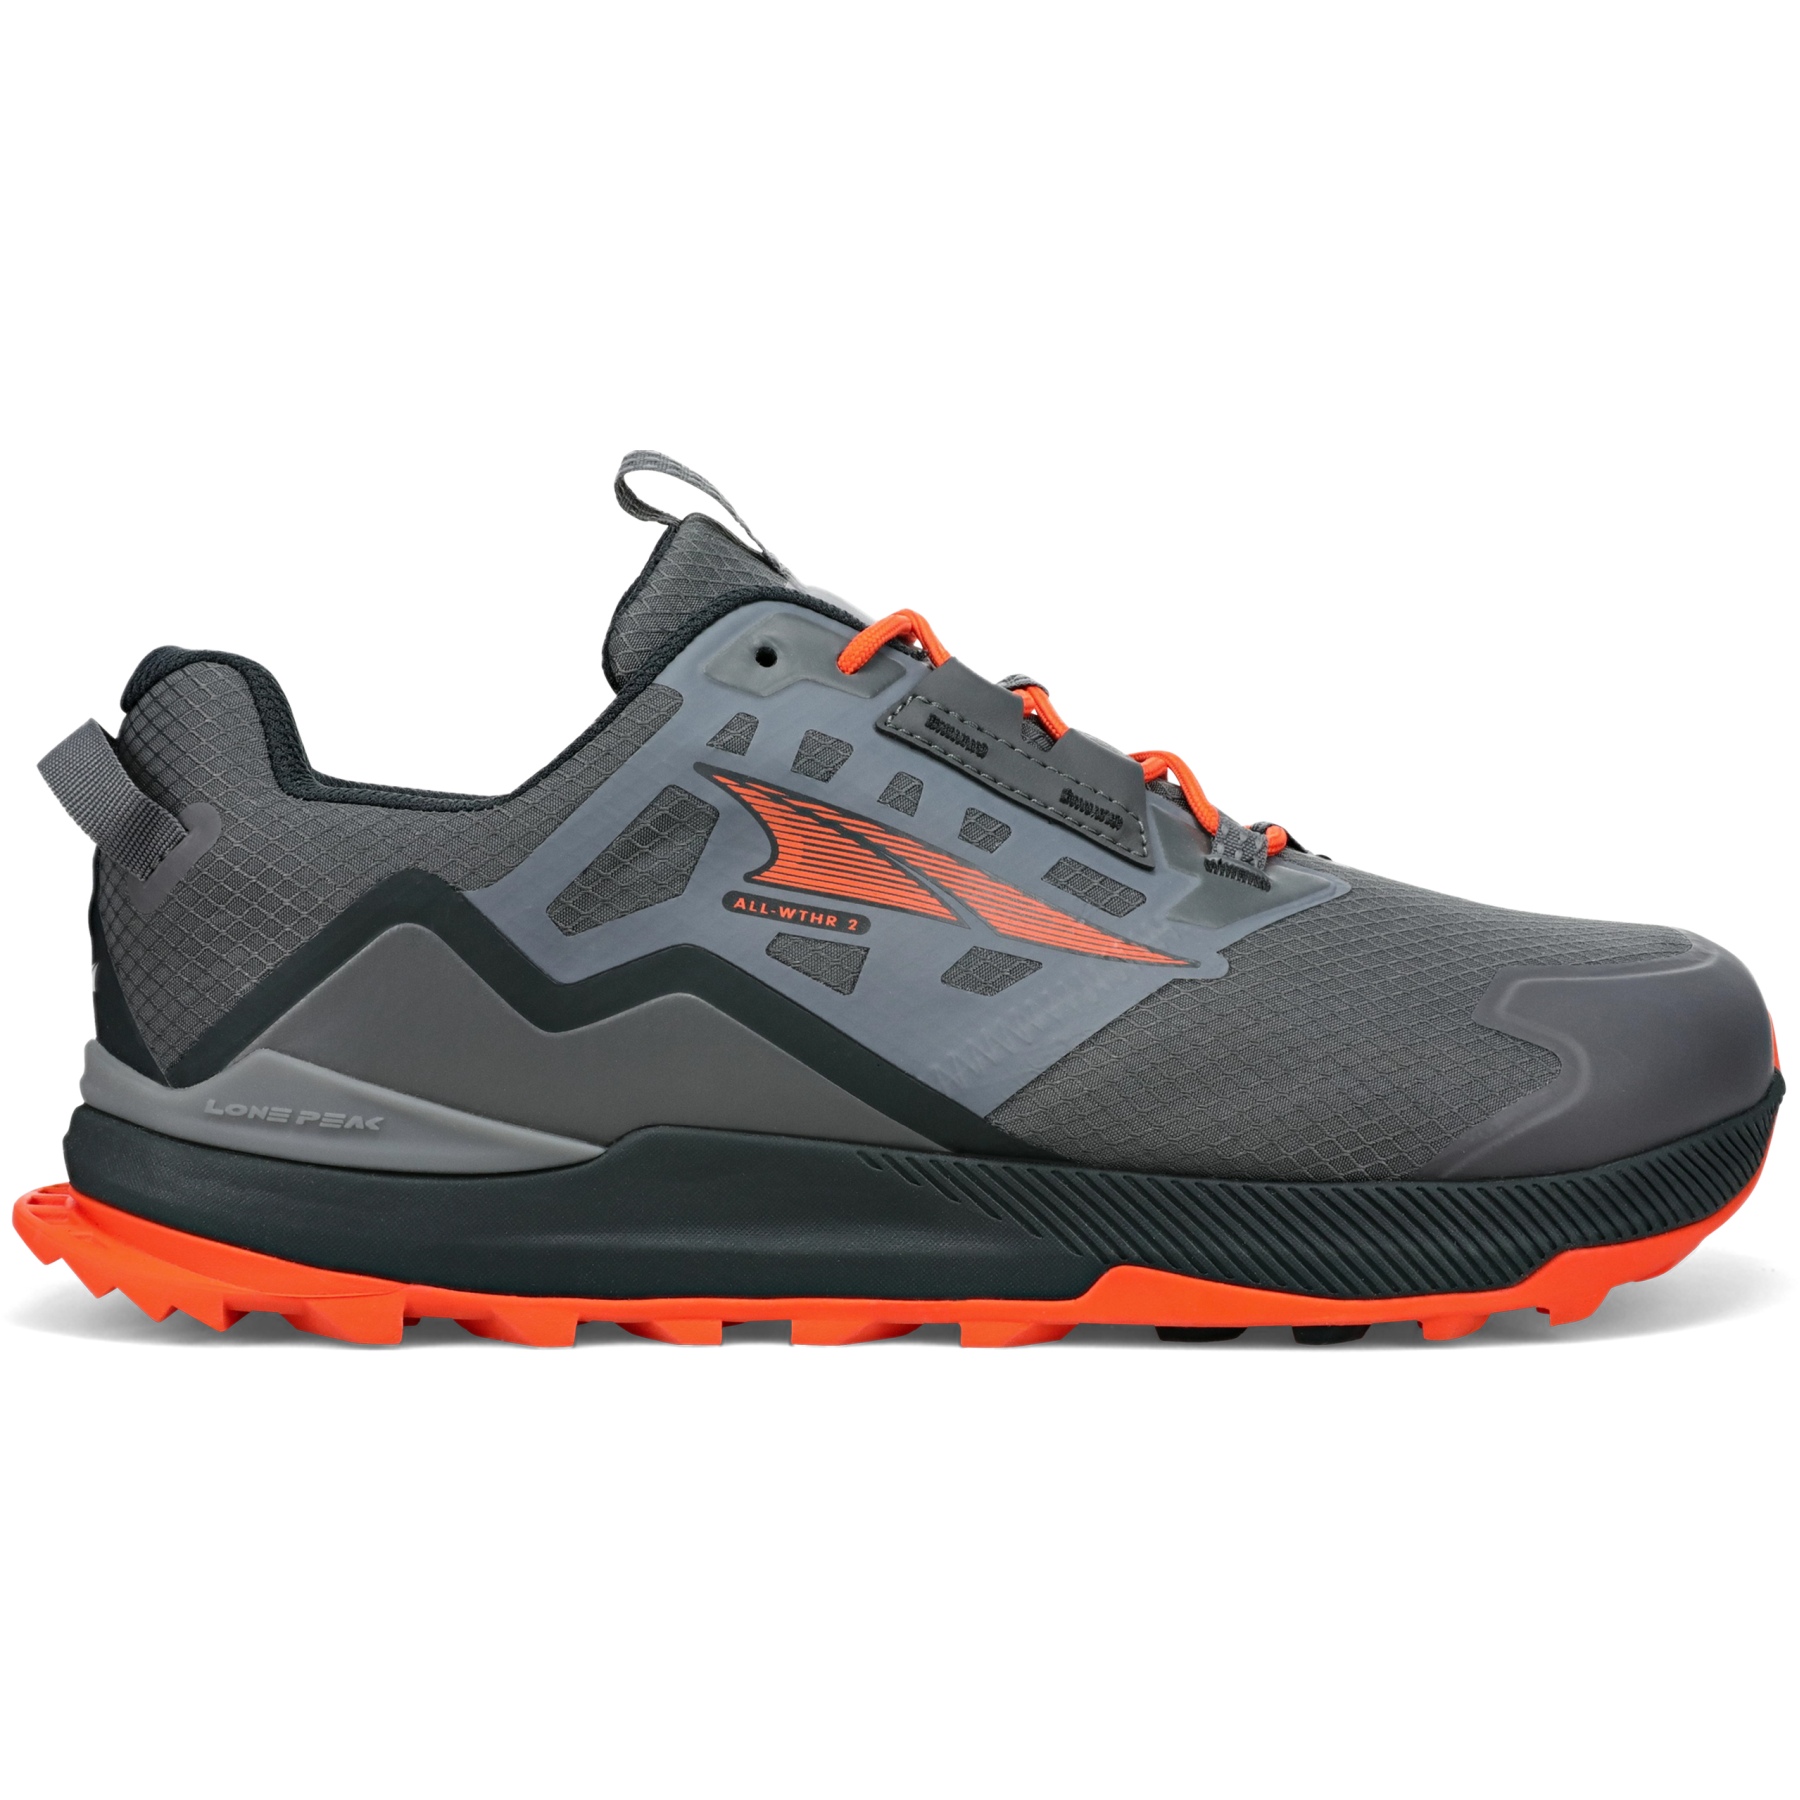 Picture of Altra Lone Peak ALL-WTHR Low 2 Hiking Shoes Men - Gray/Orange